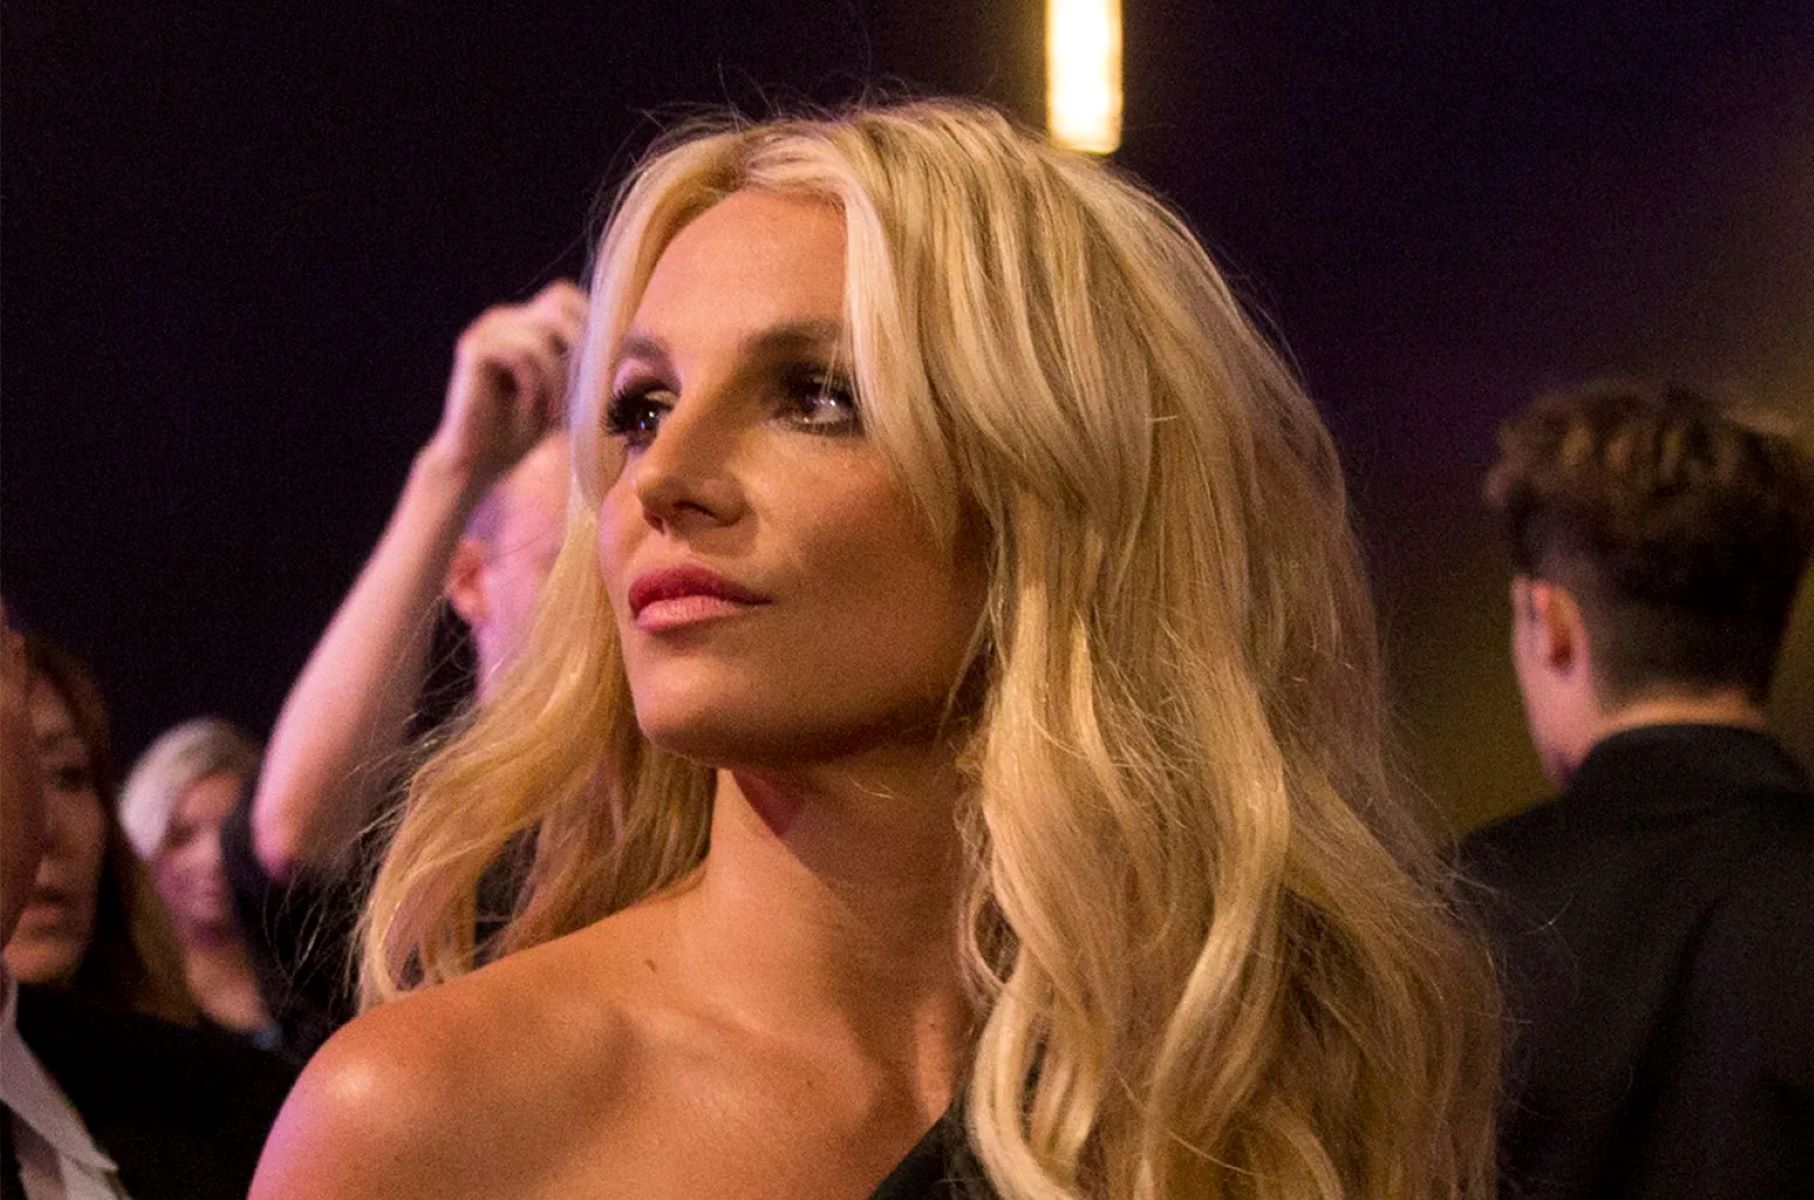 How To Watch The Britney Spears Documentary